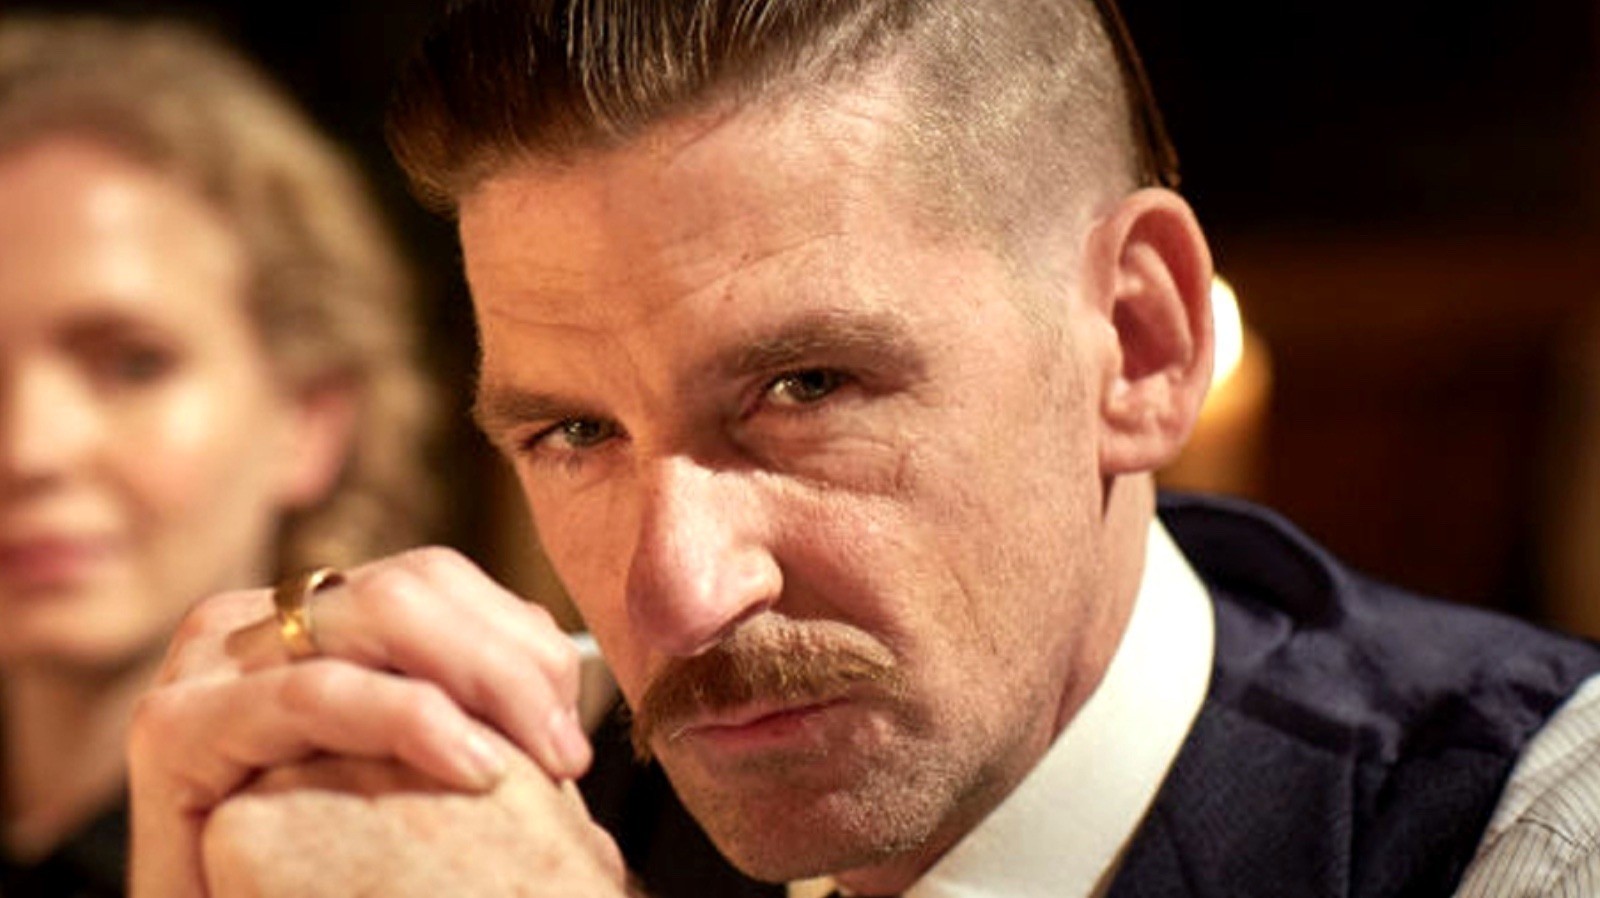 Peaky Blinders actor Paul Anderson was convicted of drug possession